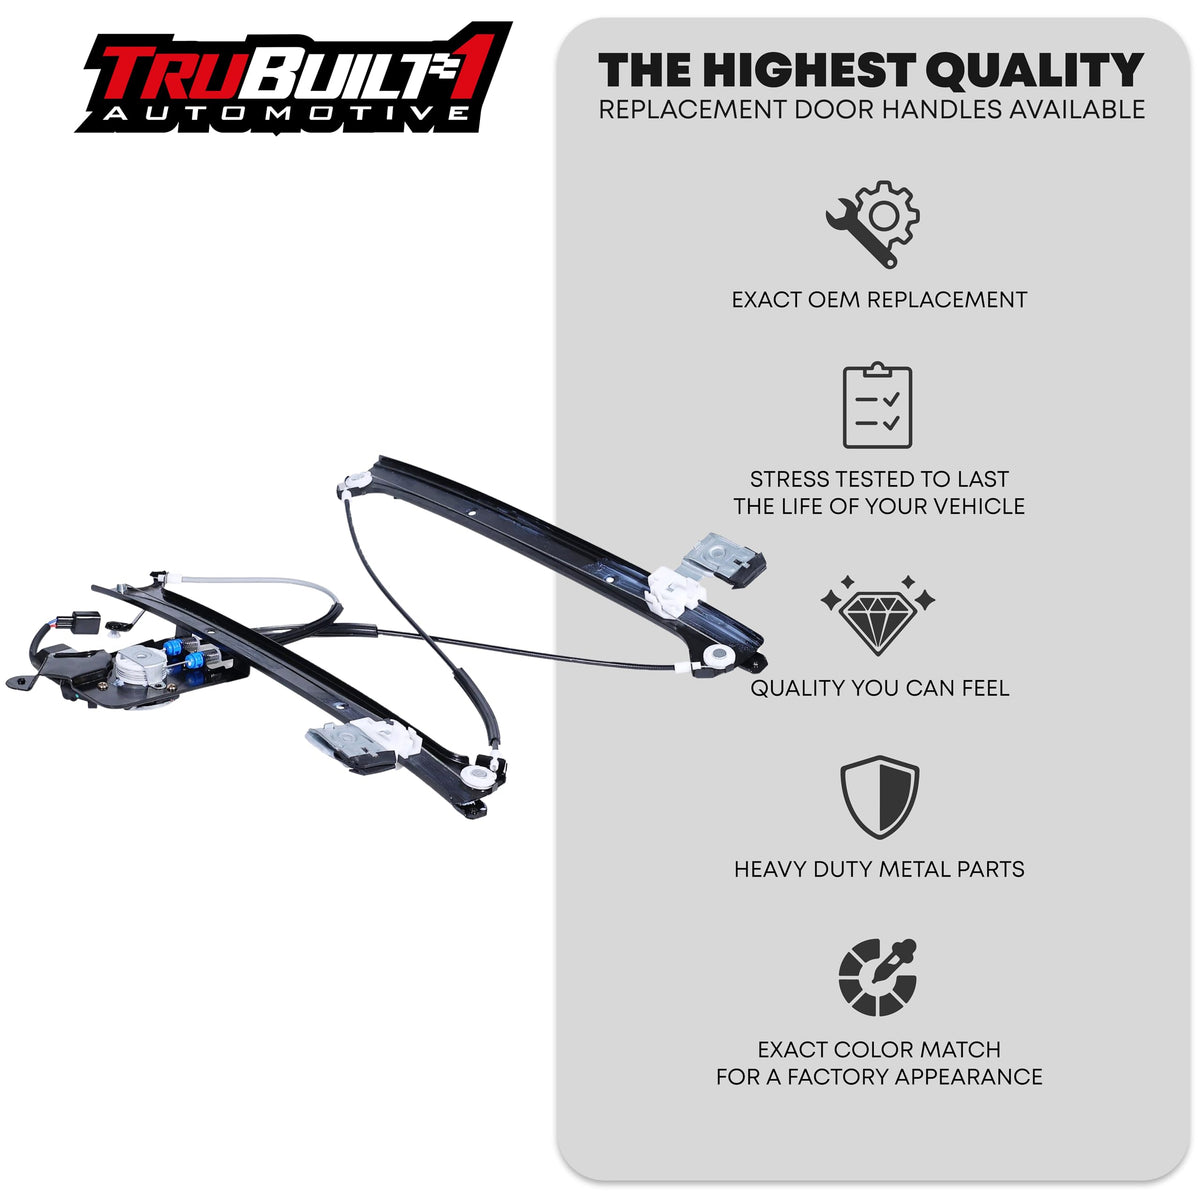 T1A TruBuilt 1 Automotive Window Regulator with Motor Assembly Rear Right Passenger Side | Compatible with Select 2000-2007 Cadillac/Chevrolet/GMC Models | Replaces# 15206913, 741-579